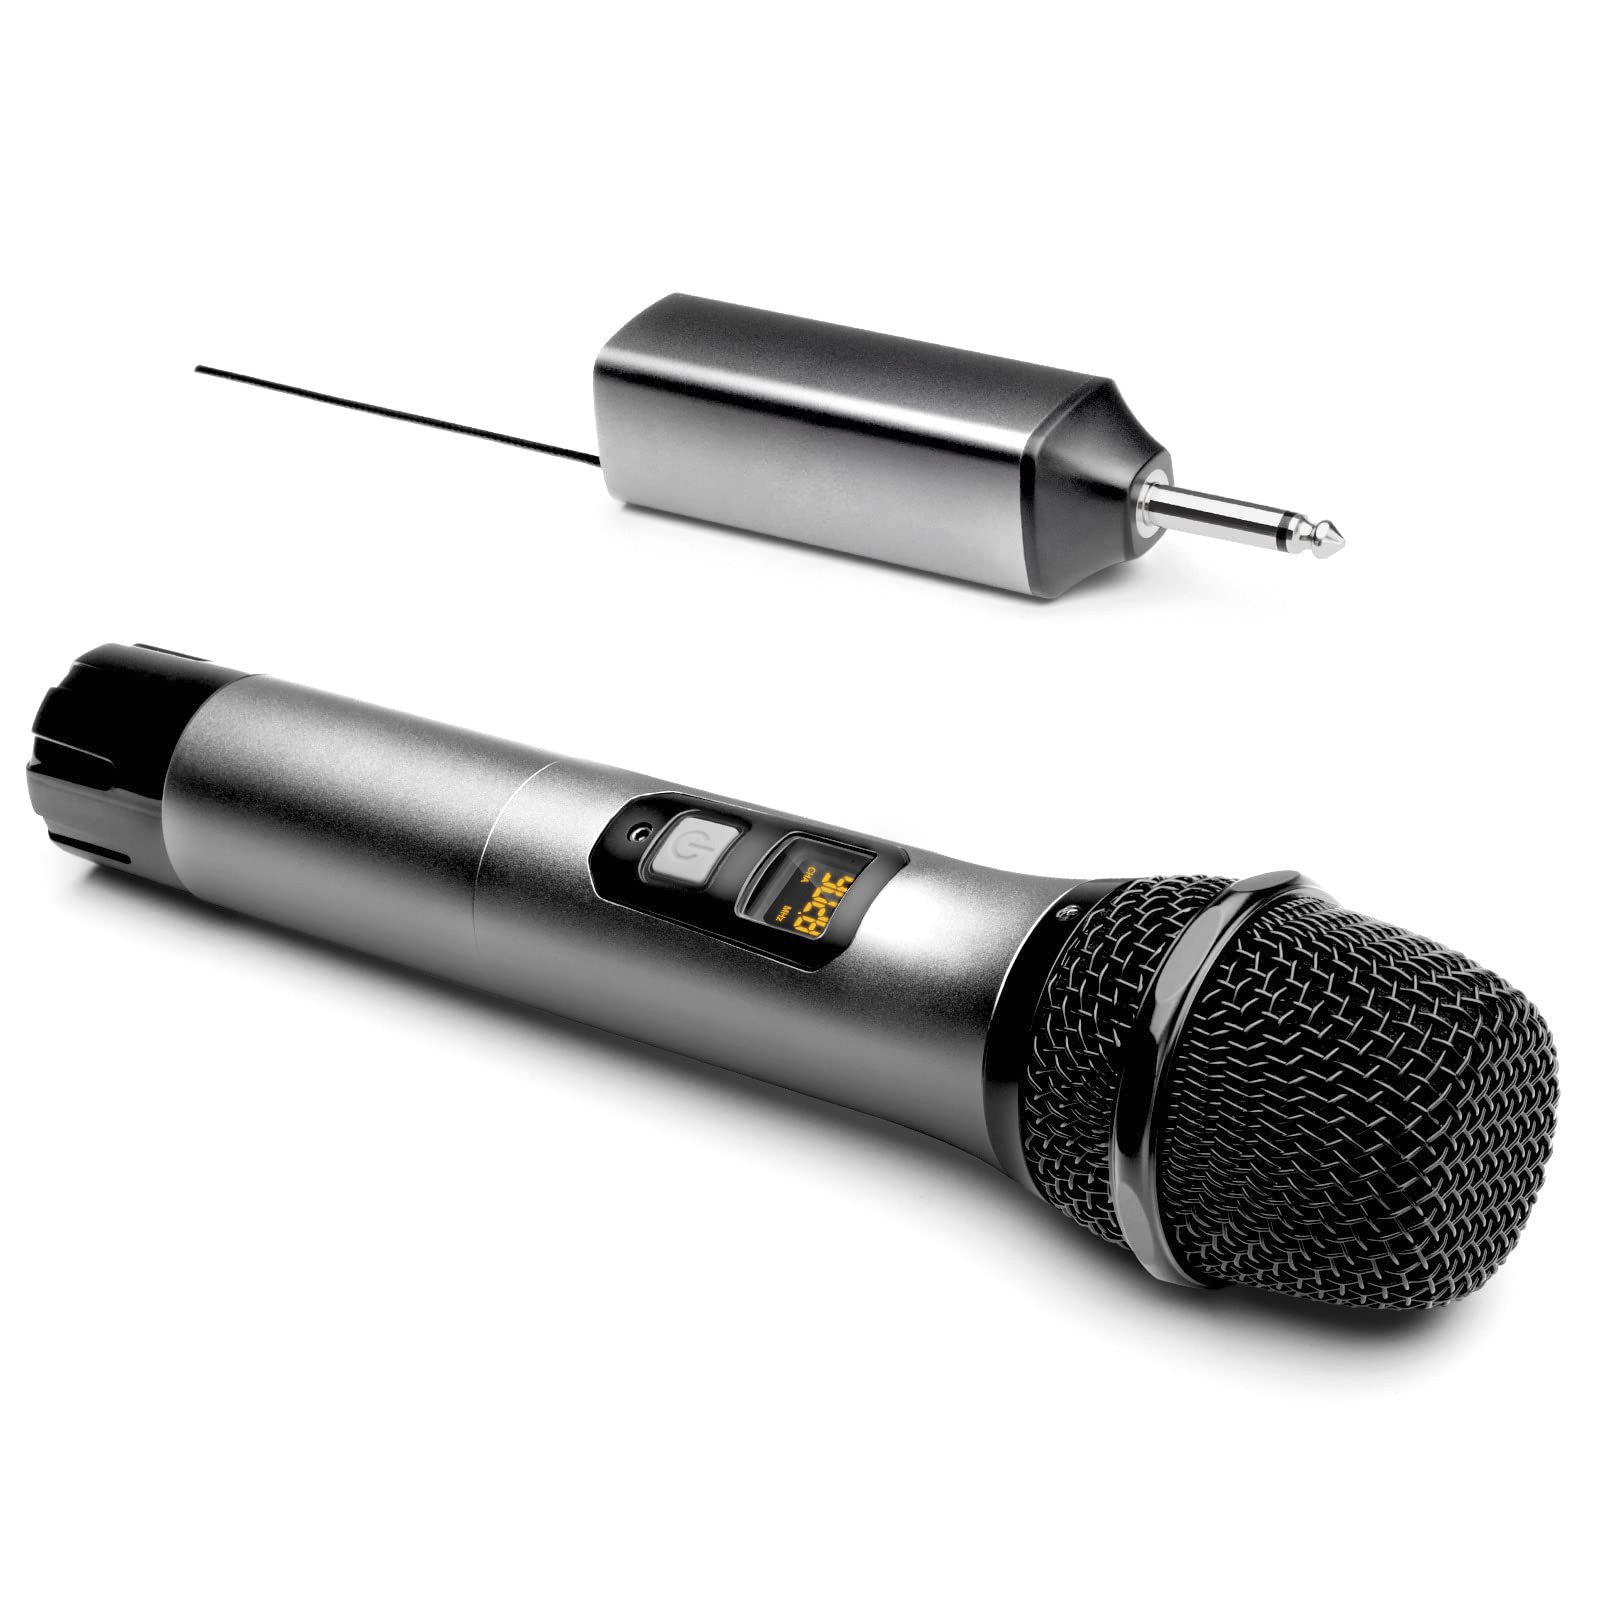 Wireless Microphone, UHF Metal Cordless Handheld Mic System with Rechargeable Receiver, for Karaoke, Singing, Party, Wedding, DJ, Speech, 200ft (TW620), Grey-OXIMETERBUY